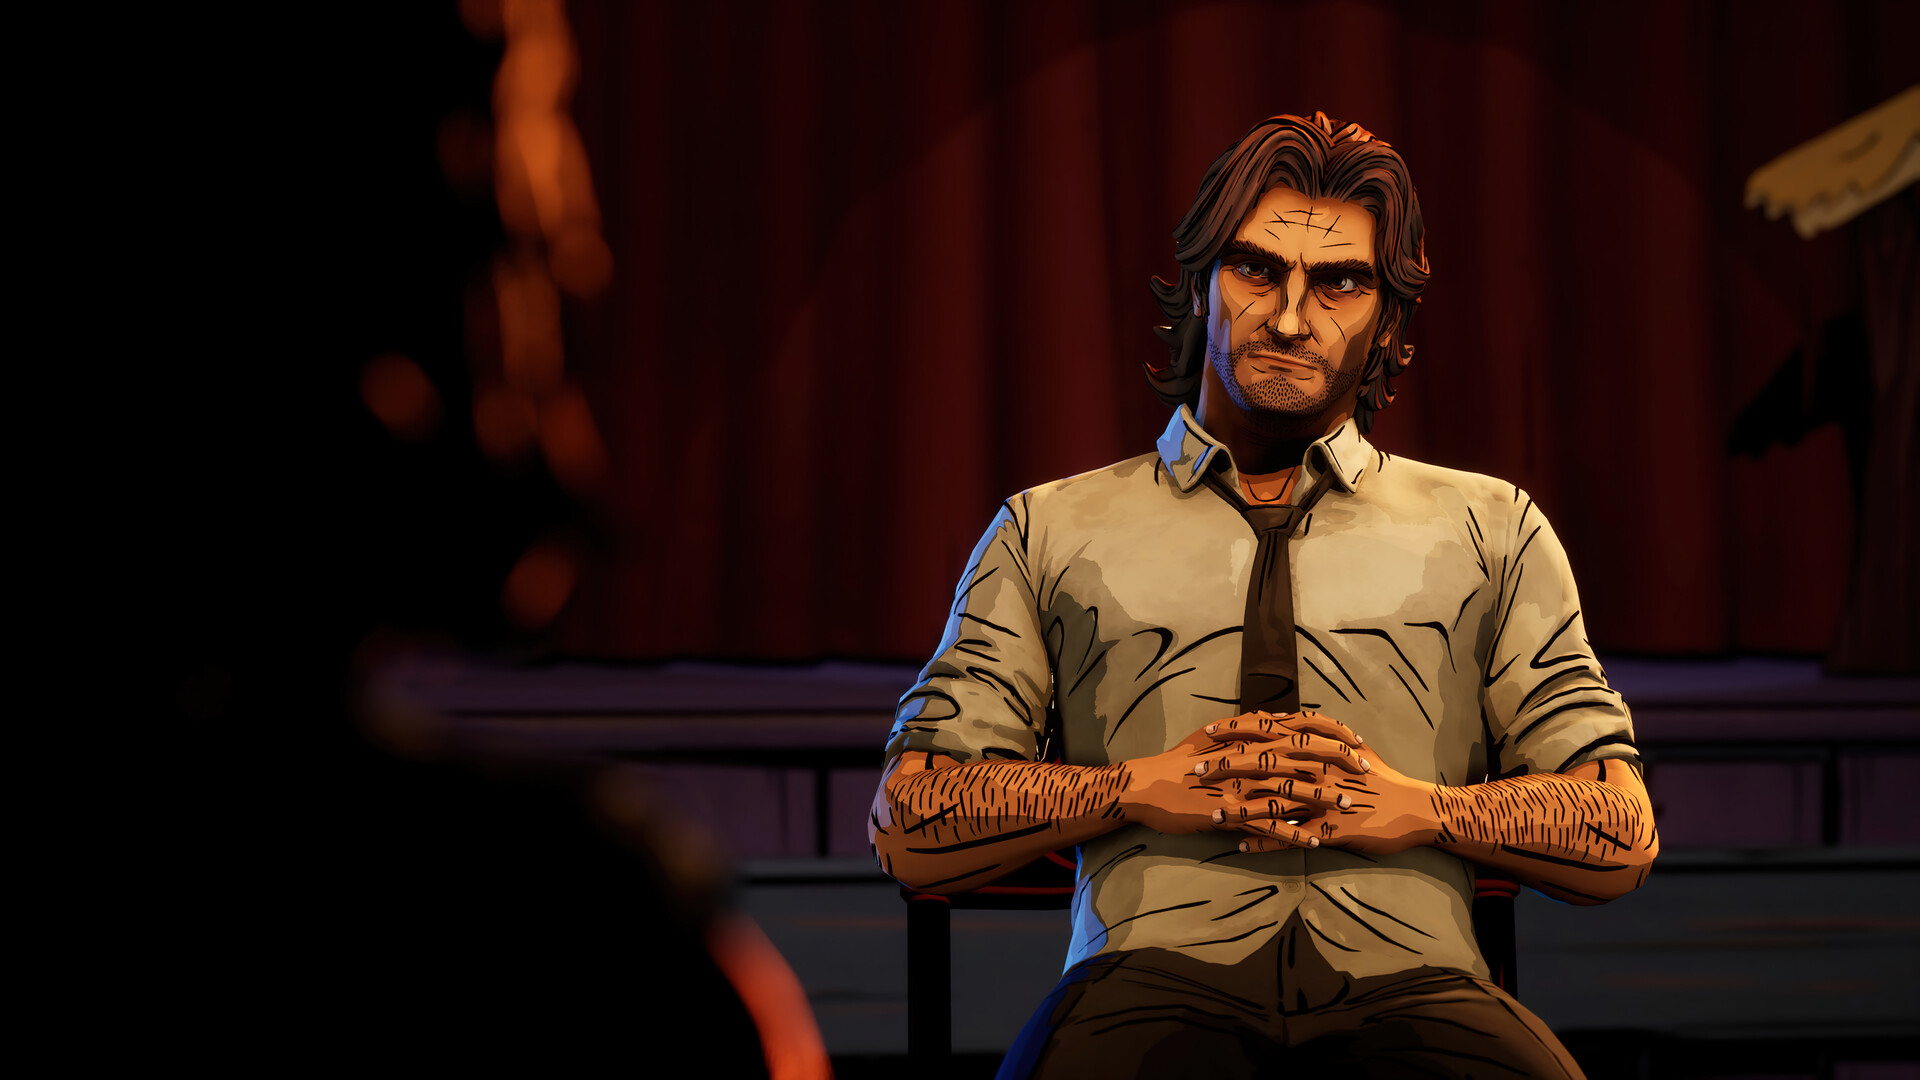 The Wolf Among Us The Big Bad Wolf Telltale Games PC Gaming Video Games A Telltale Games Series 1920x1080